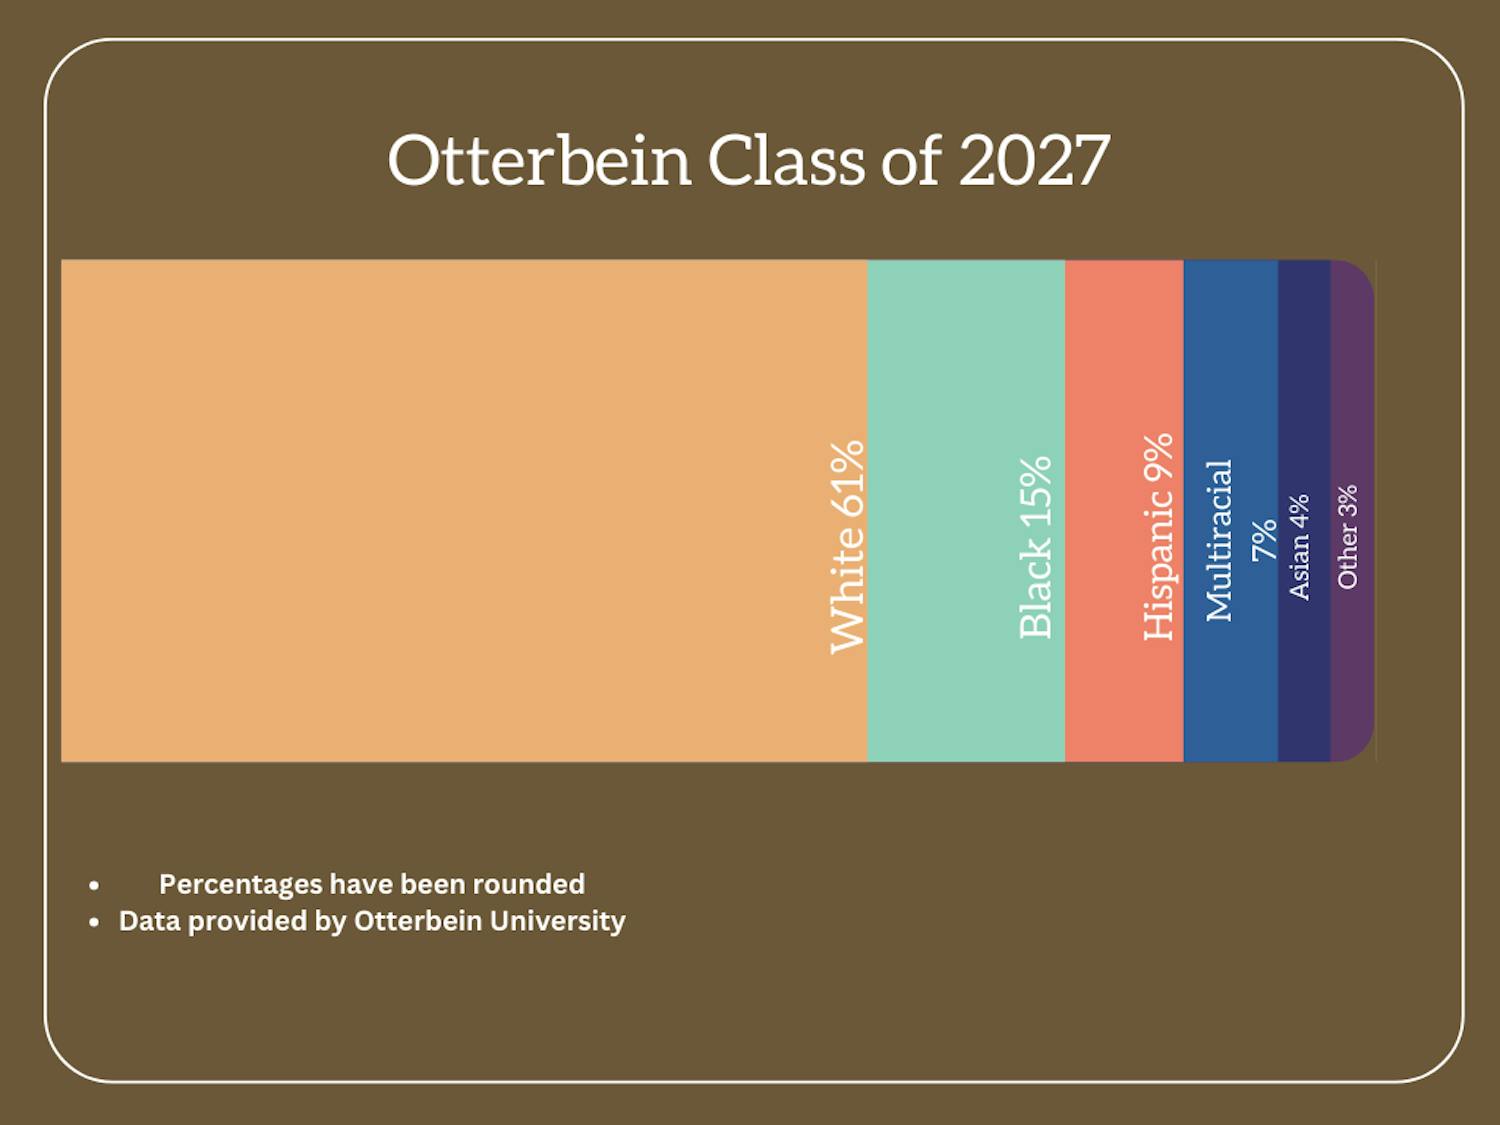 A graph on a brown background reads "Otterbein Class of 2027" and shows the demographics of the class. The bar graph reads "White 61%," "Black 15%," "Hispanic 9%," "Multiracial 7%," "Asian 4%," and "Other 3%." Underneath the bar graph, it reads "Percentages have been rounded" and "Data Provided by Otterbein University."